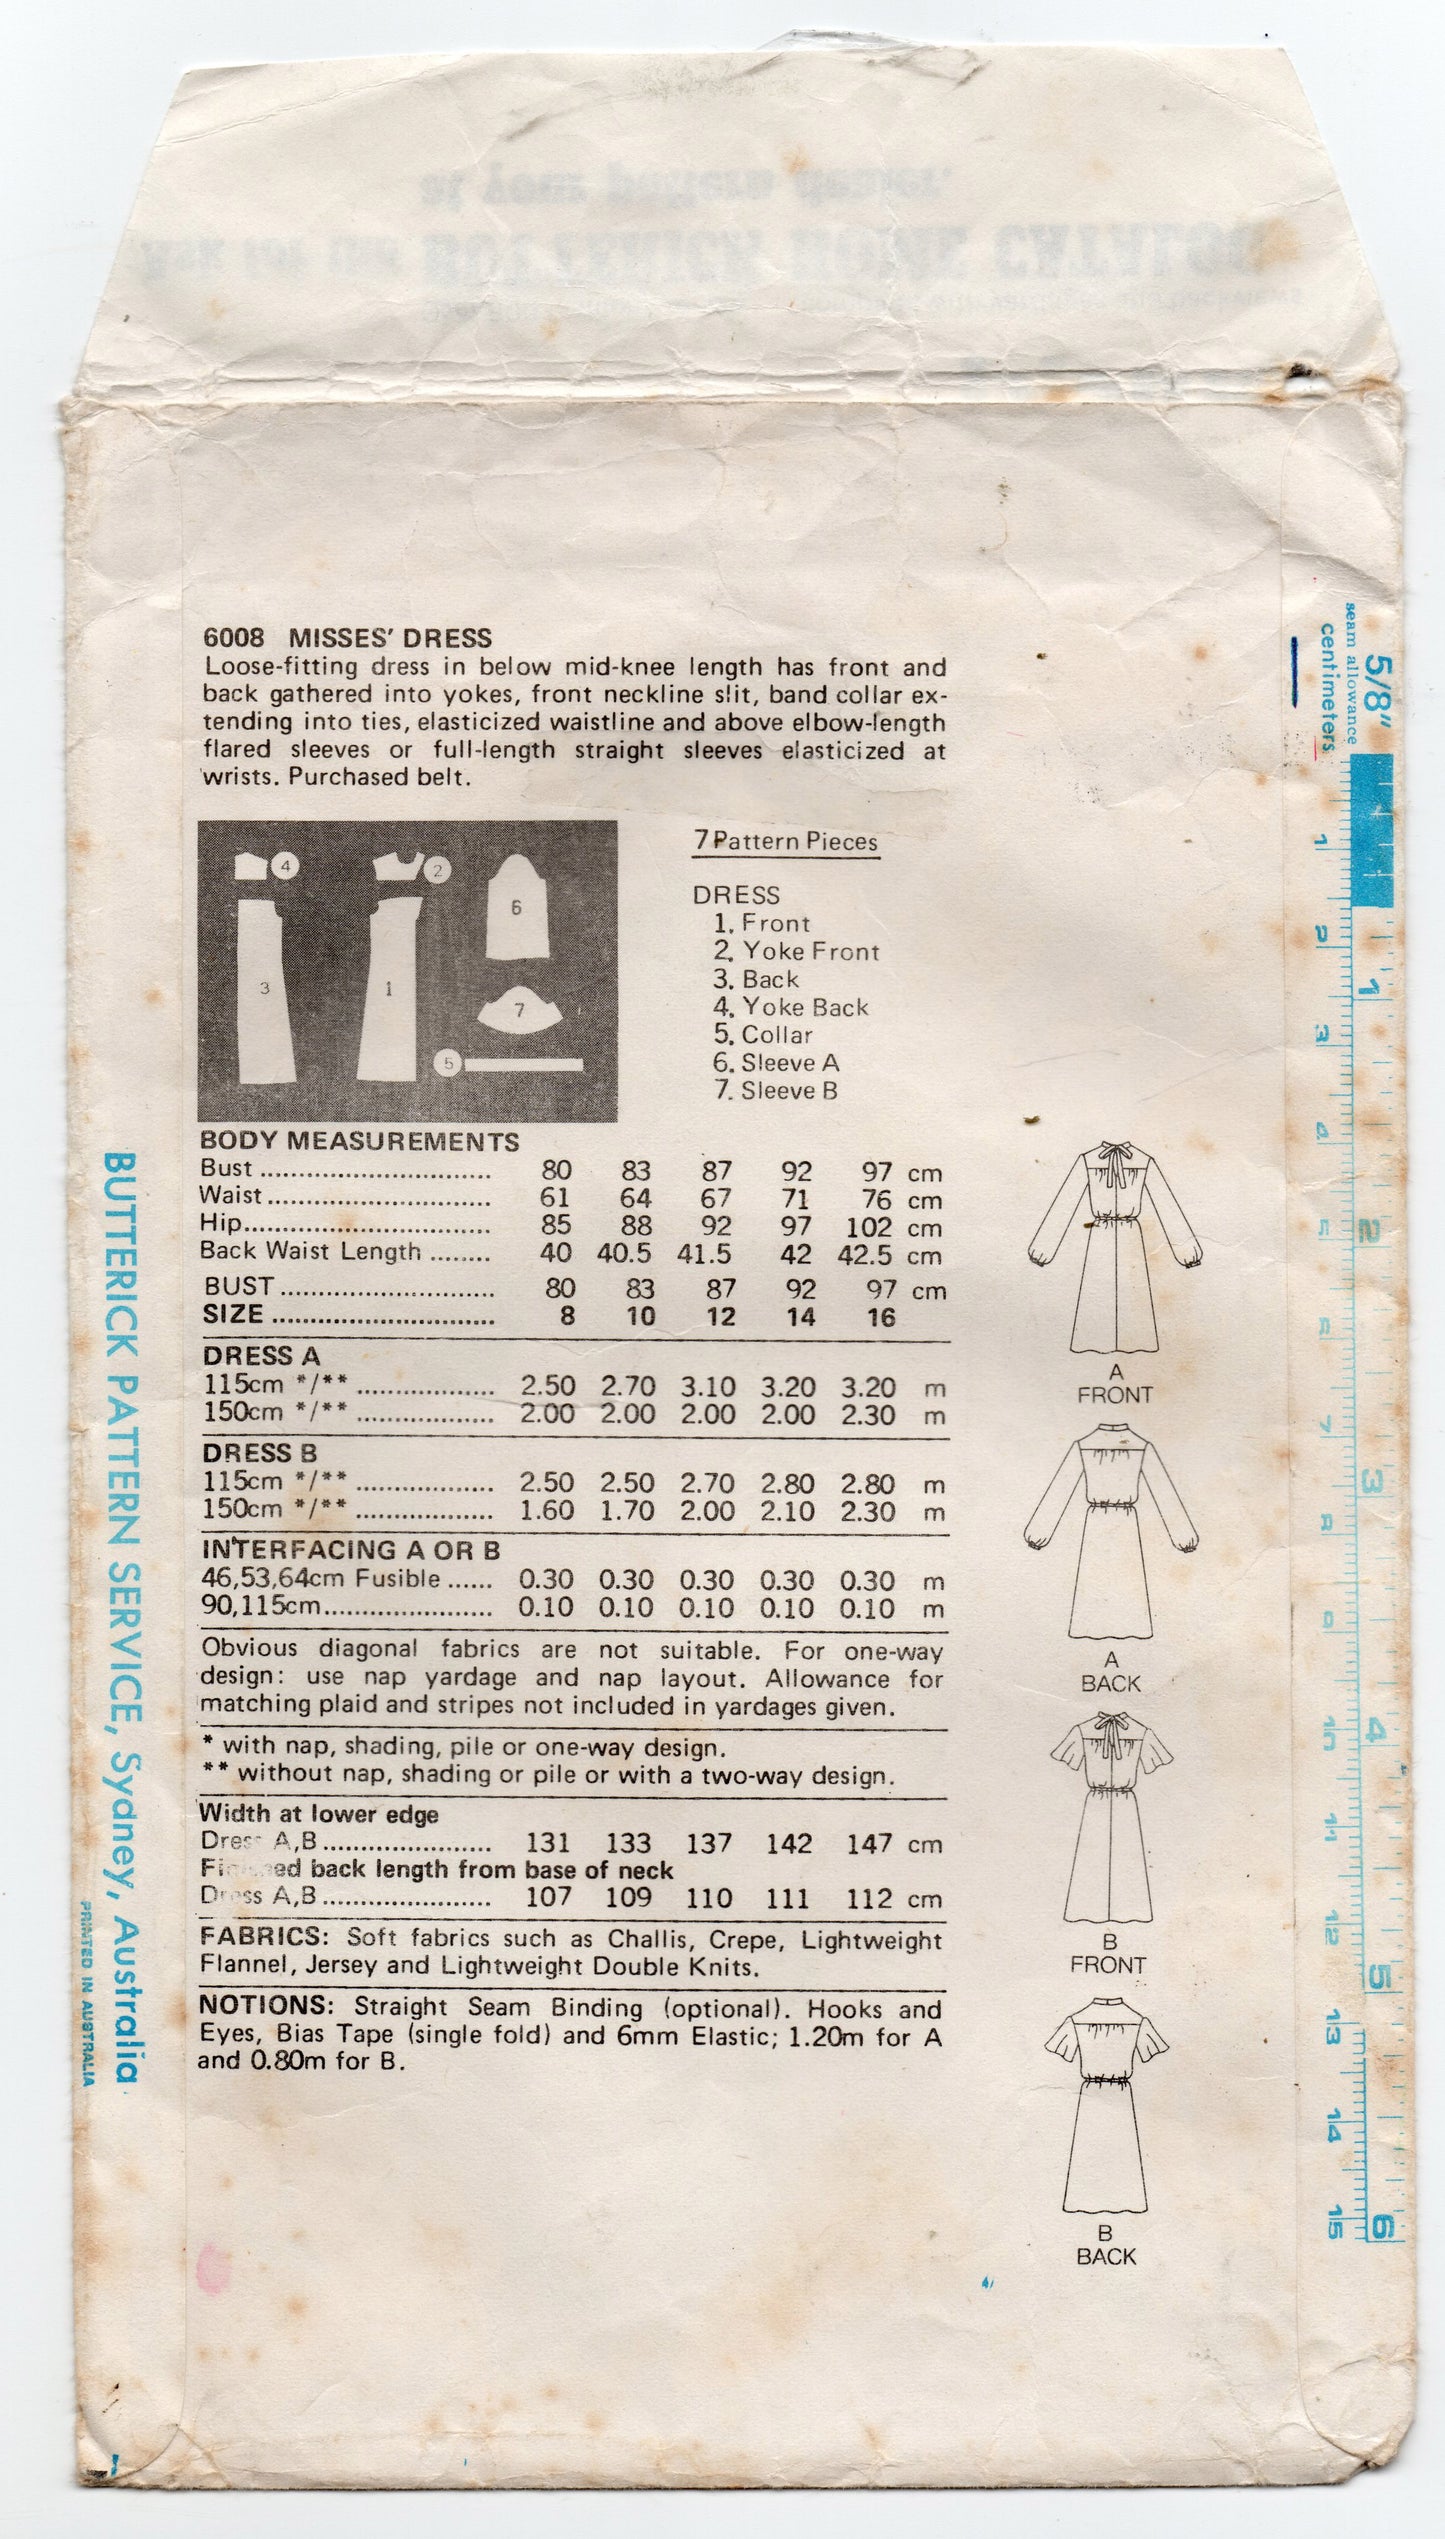 Butterick 6921 Womens Tucked Front Blouses 1980s Vintage Sewing Pattern Size 10 Bust 32.5 inches